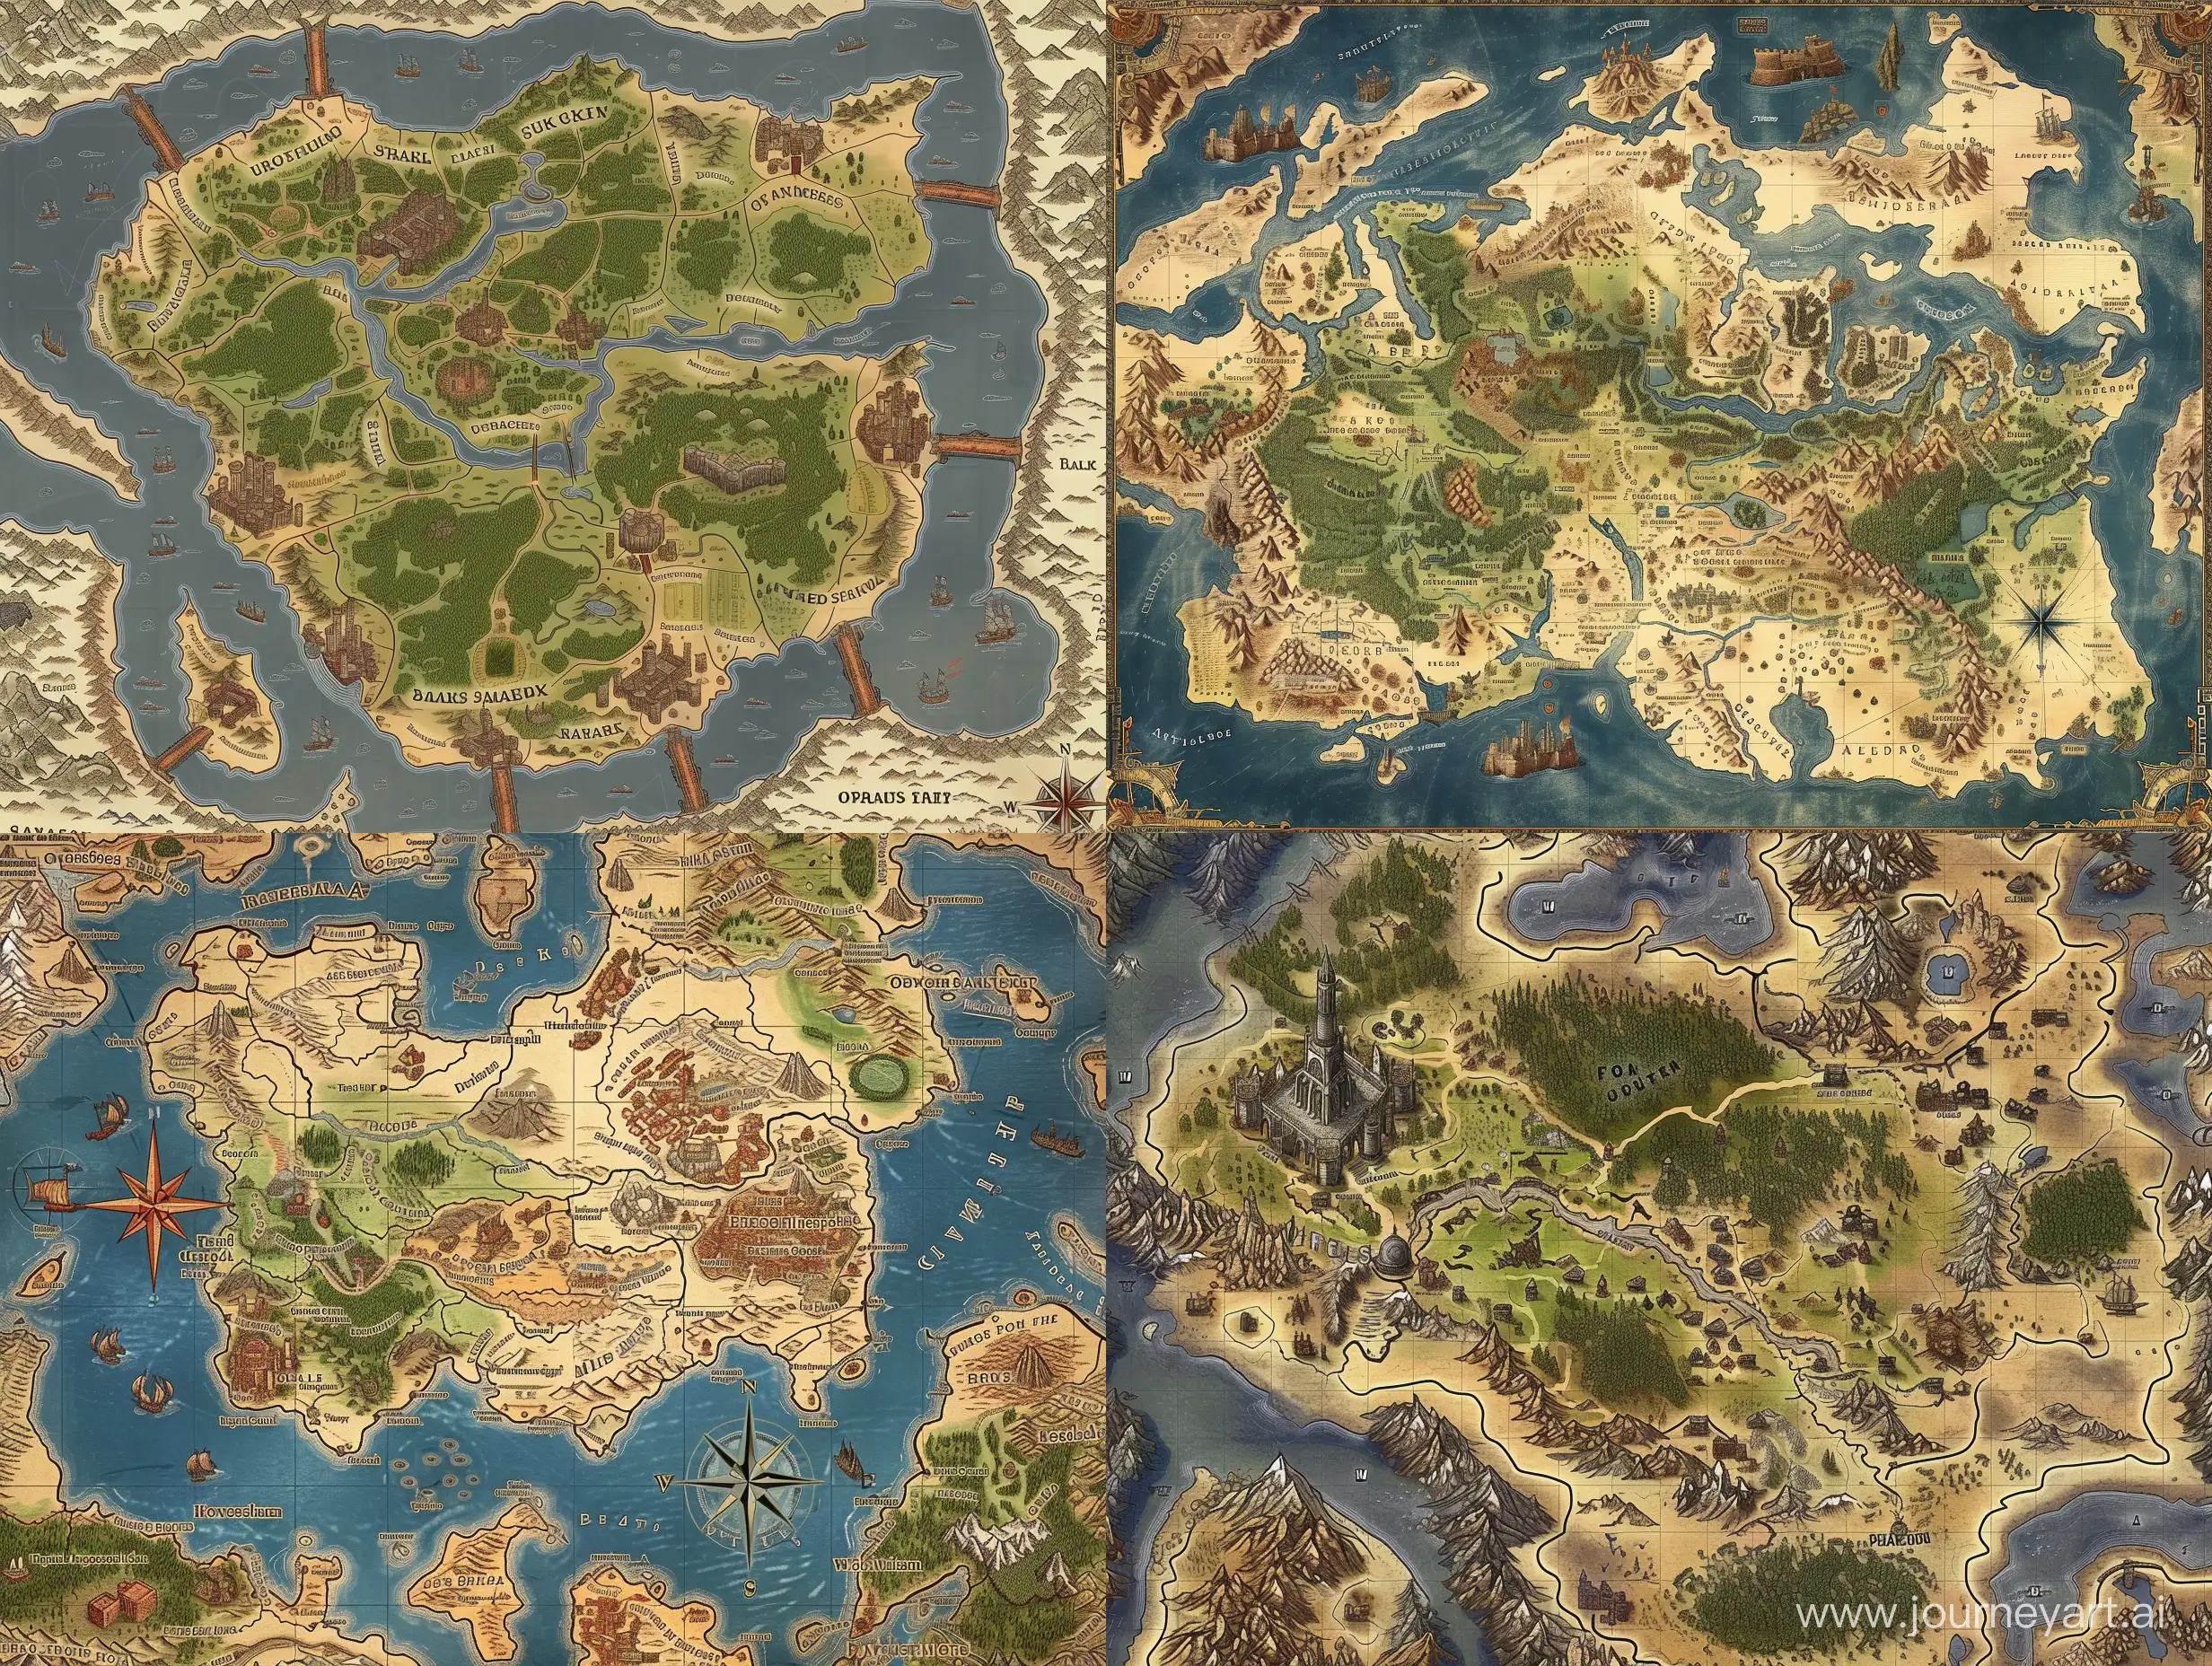 Top down style map of a fictional world